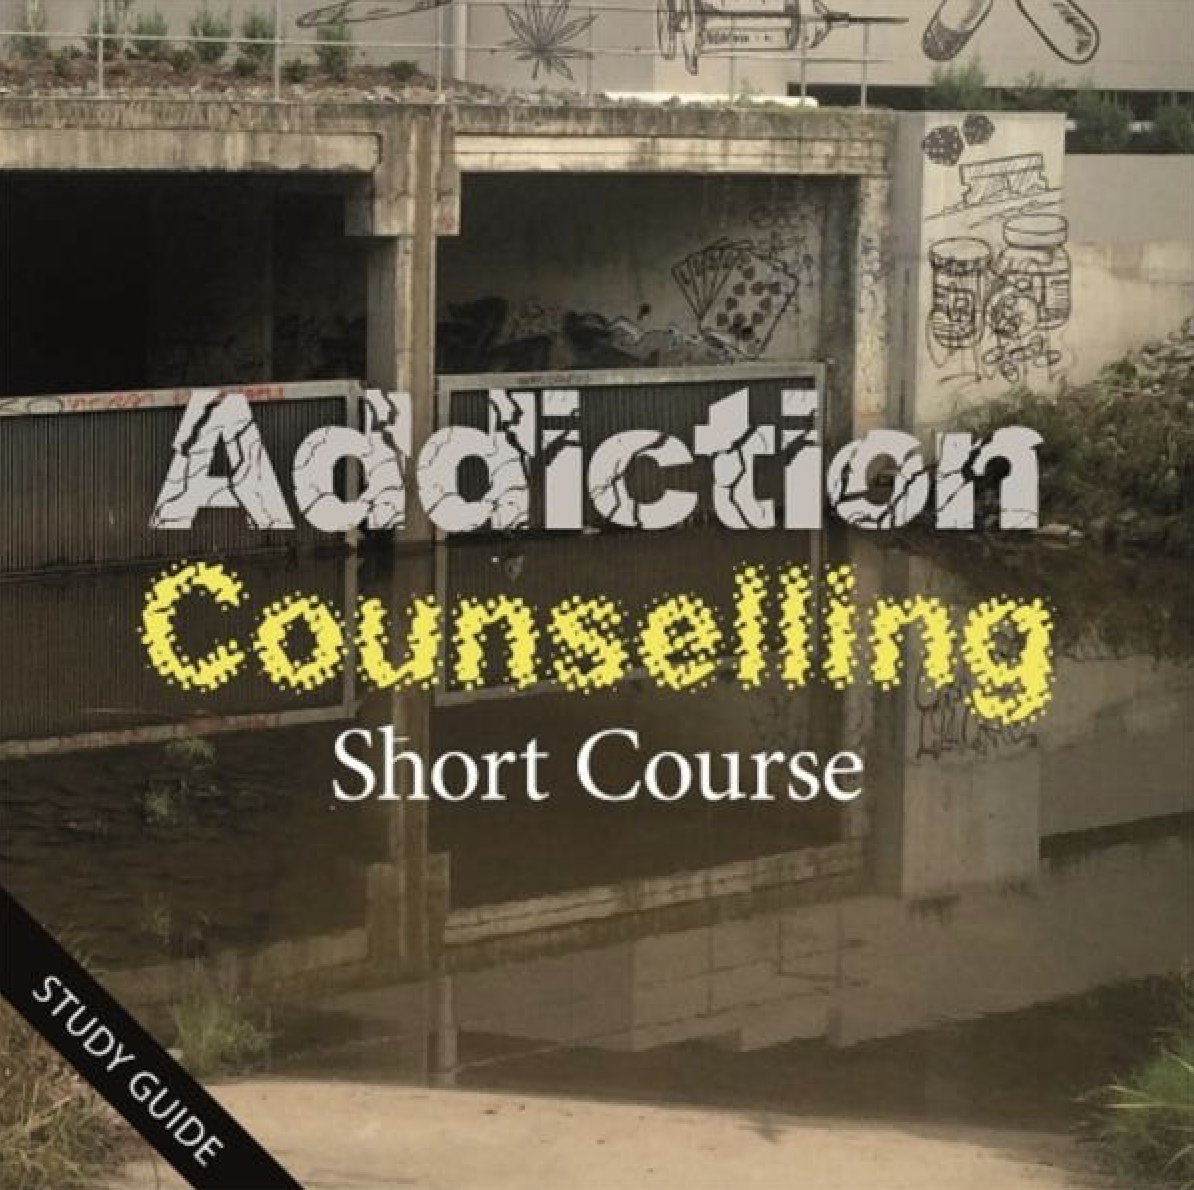 Self Paced 20-hour course to help you how to counsel persons suffering from addiction.
acsebooks.com/product-addict… #addictioncounselling #addiction #addictions #addictionservice #addictiontreatment #acsdistanceeducation #counselling #counsellingcourse #remotelearning #onlinecourse